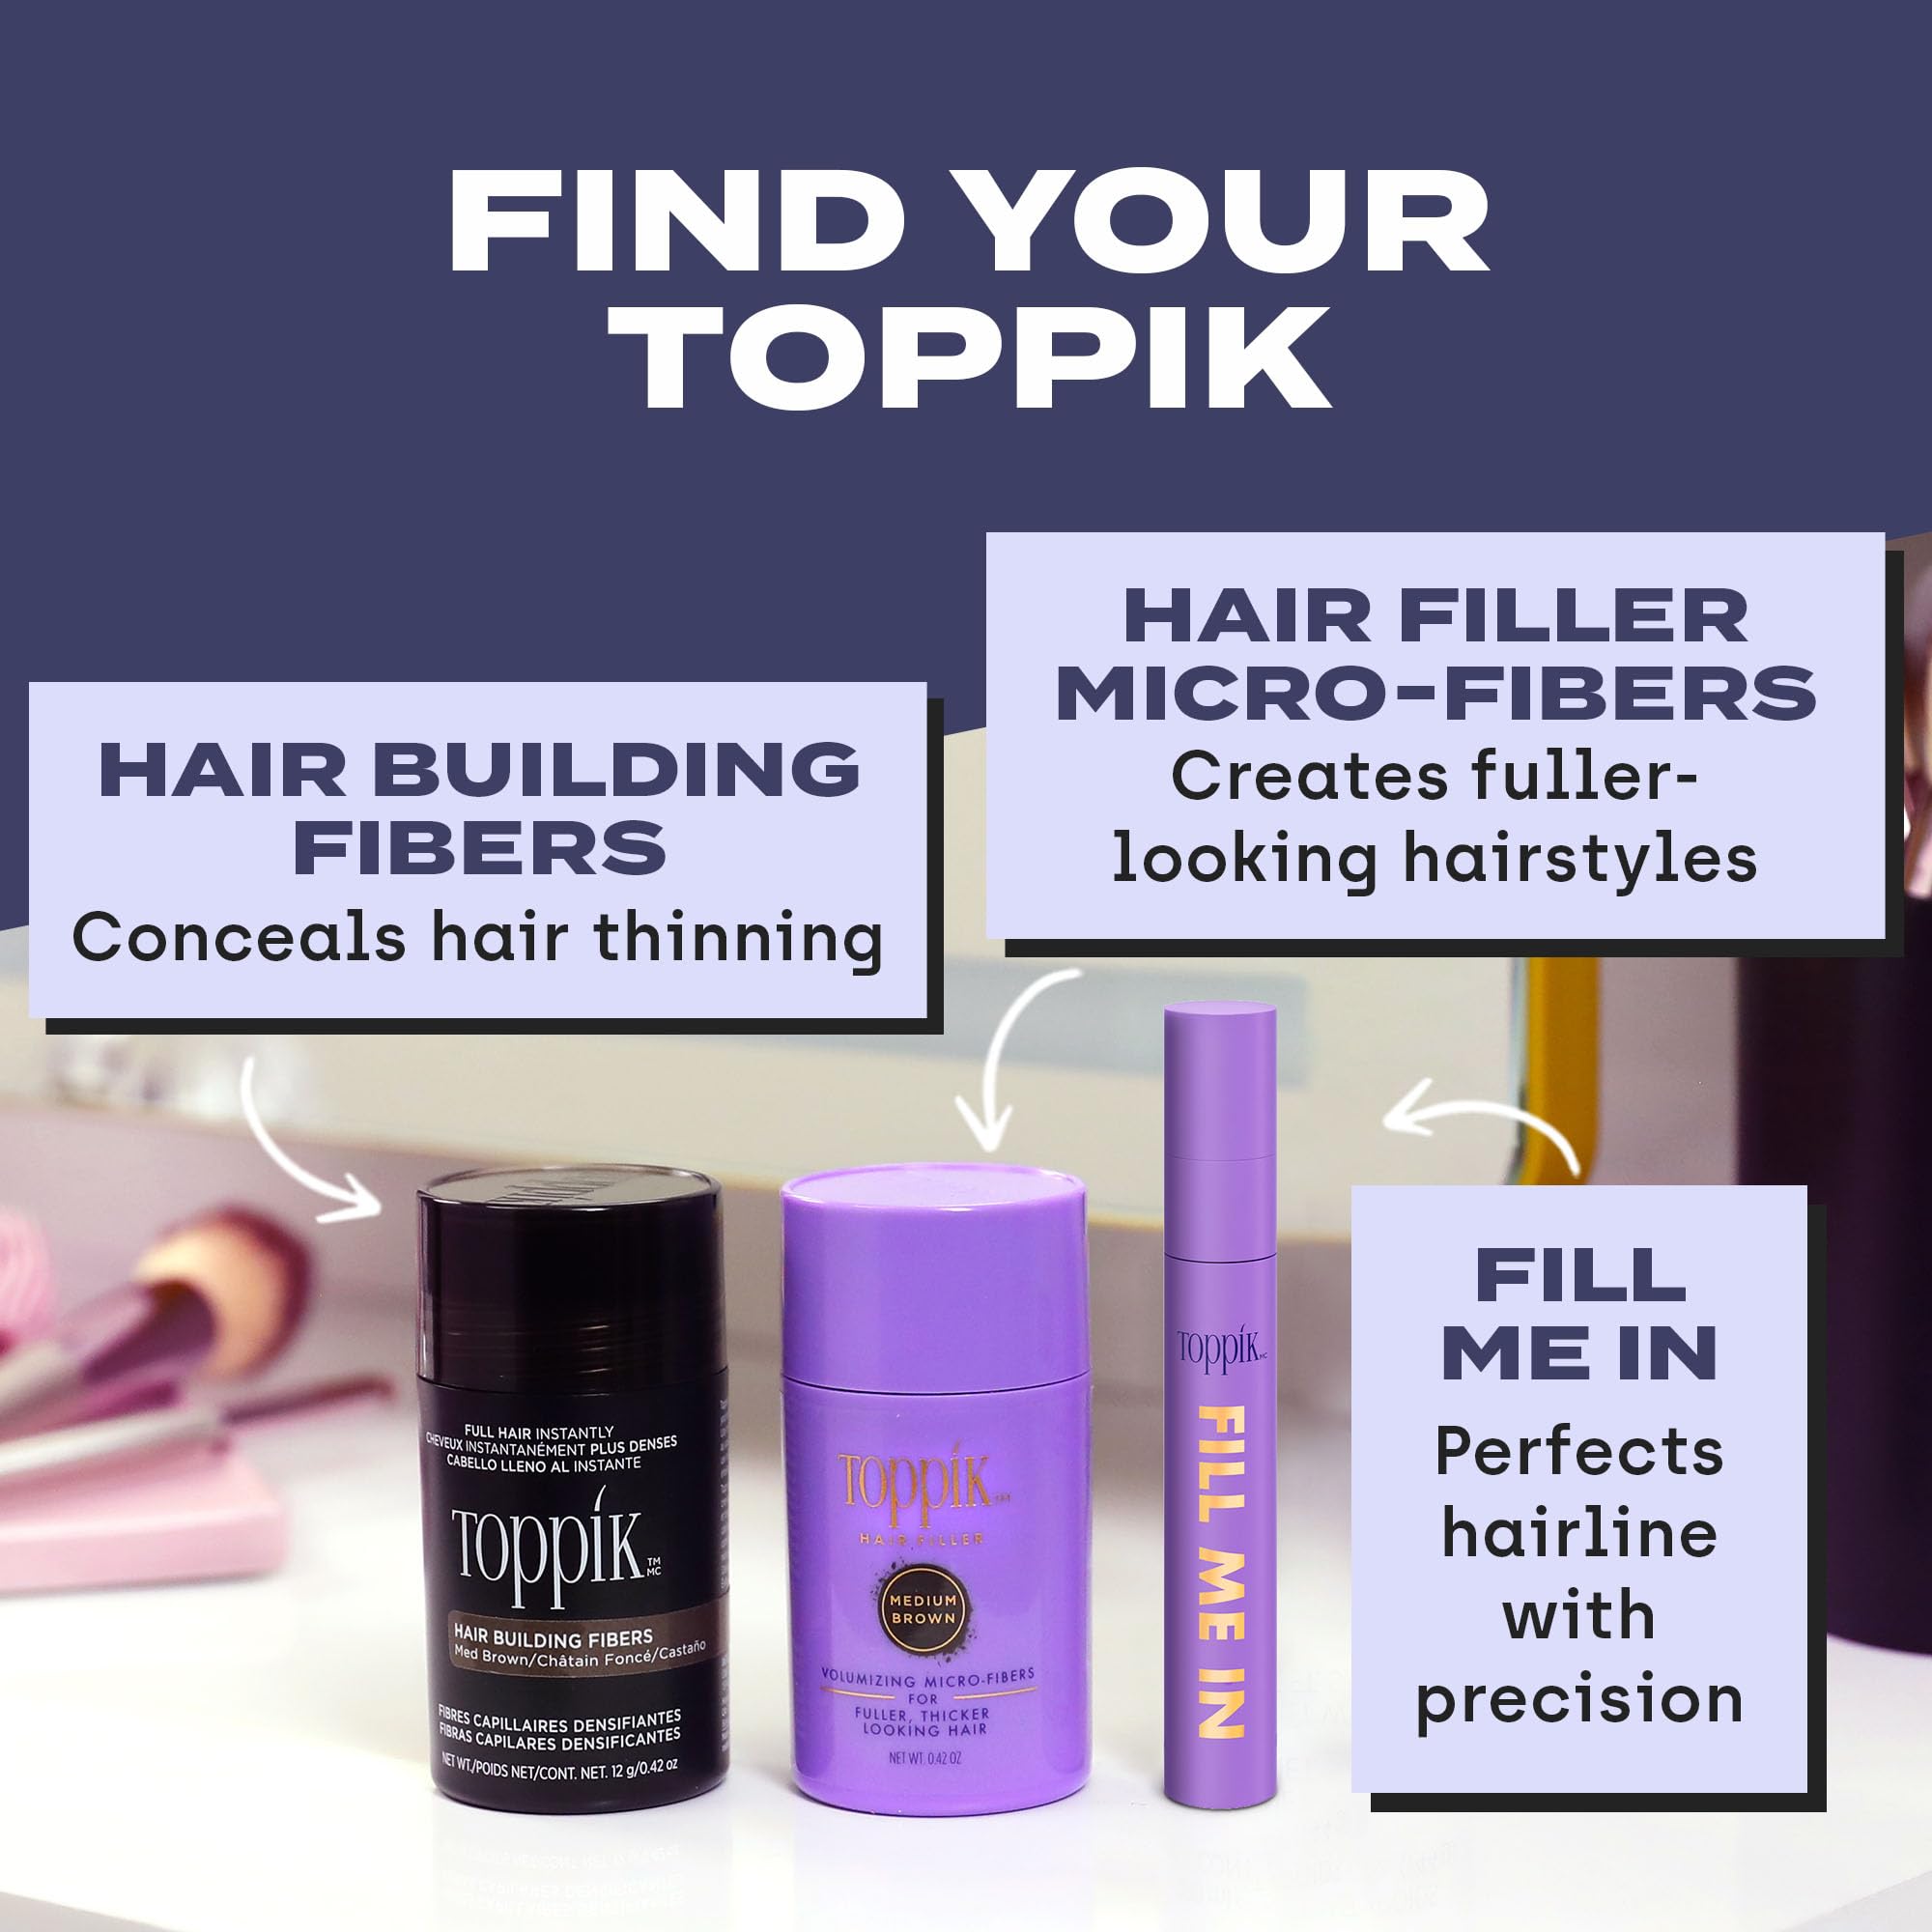 Toppik Fill Me In Hairline Filler, Hair Color Root Touchup, Hair Fibers Wand, Fills In Thinning Hairline, Hair Styling Product, 0.176 oz (5 g), Medium Blonde